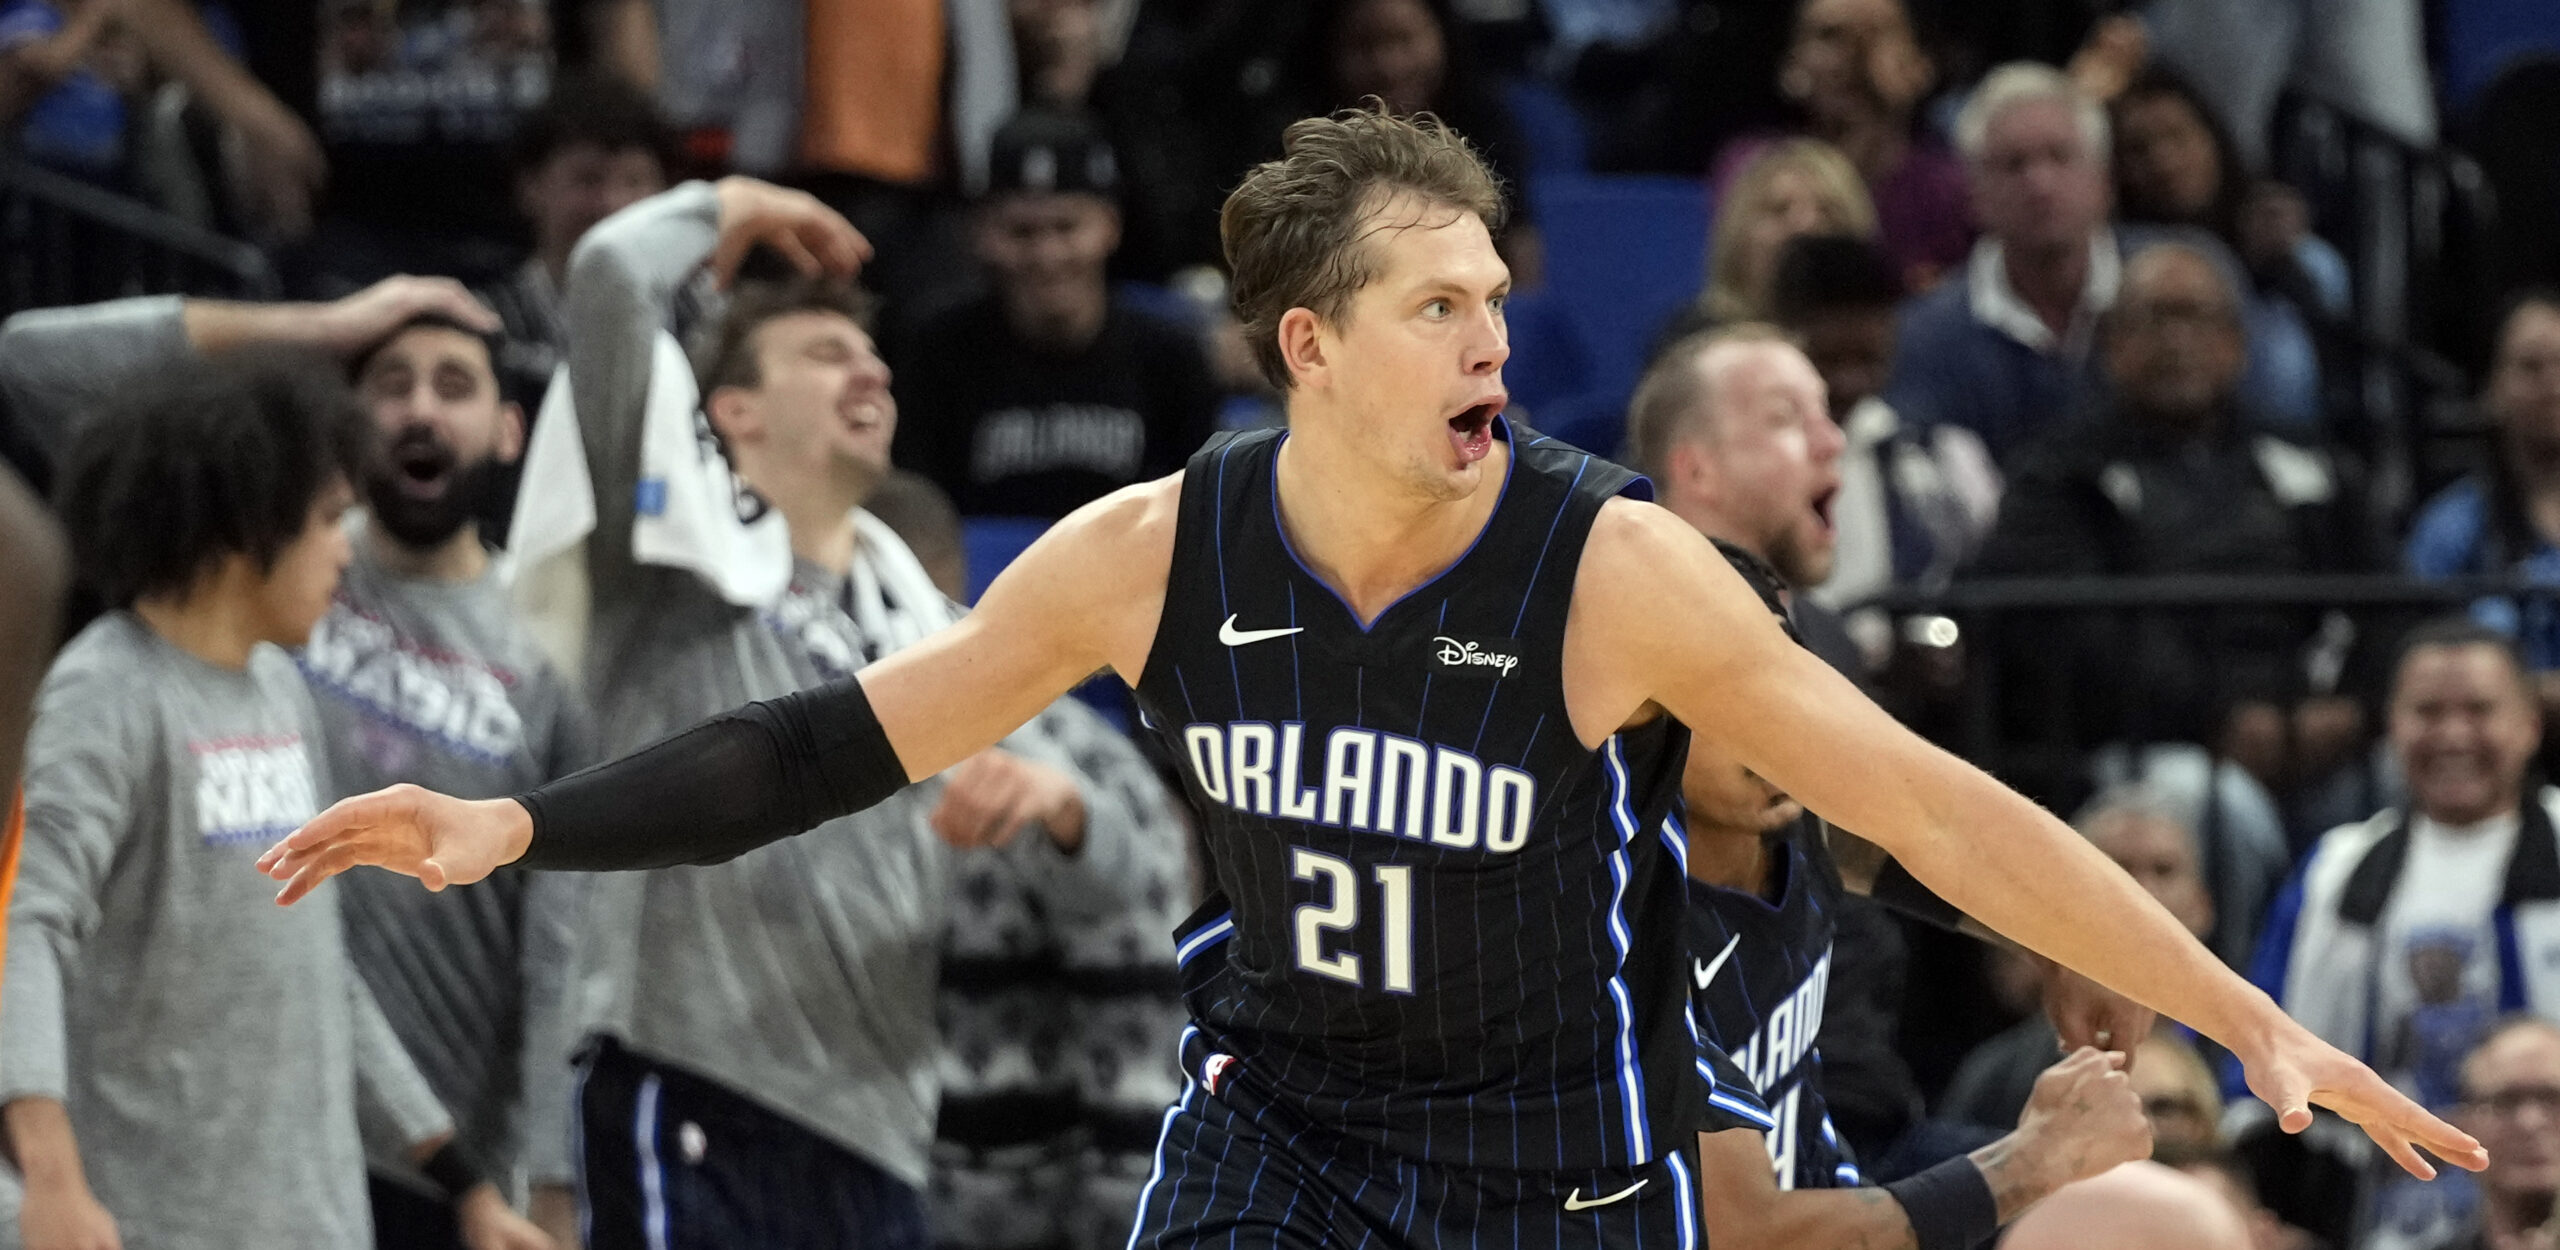 Orlando Magic center Moritz Wagner (21) celebrates after dunking the ball against the Washington Wizards during the second half of an NBA basketball game, Wednesday, Nov. 29, 2023, in Orlando, Fla. (AP Photo/John Raoux)